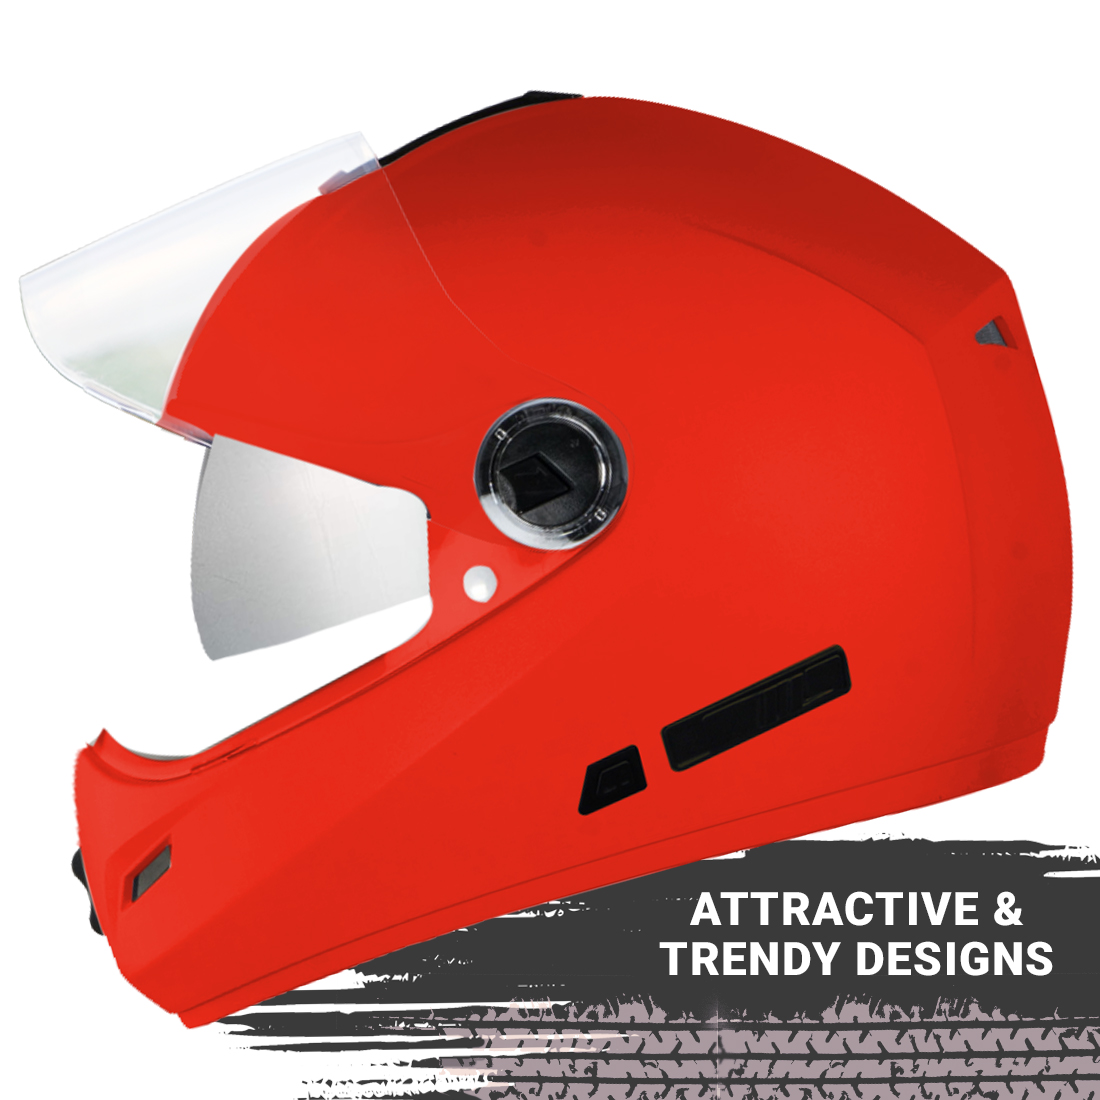 Steelbird SB-39 Cyborg ISI Certified Full Face Helmet For Men And Women With Sun Shield (Glossy Fluo Red)